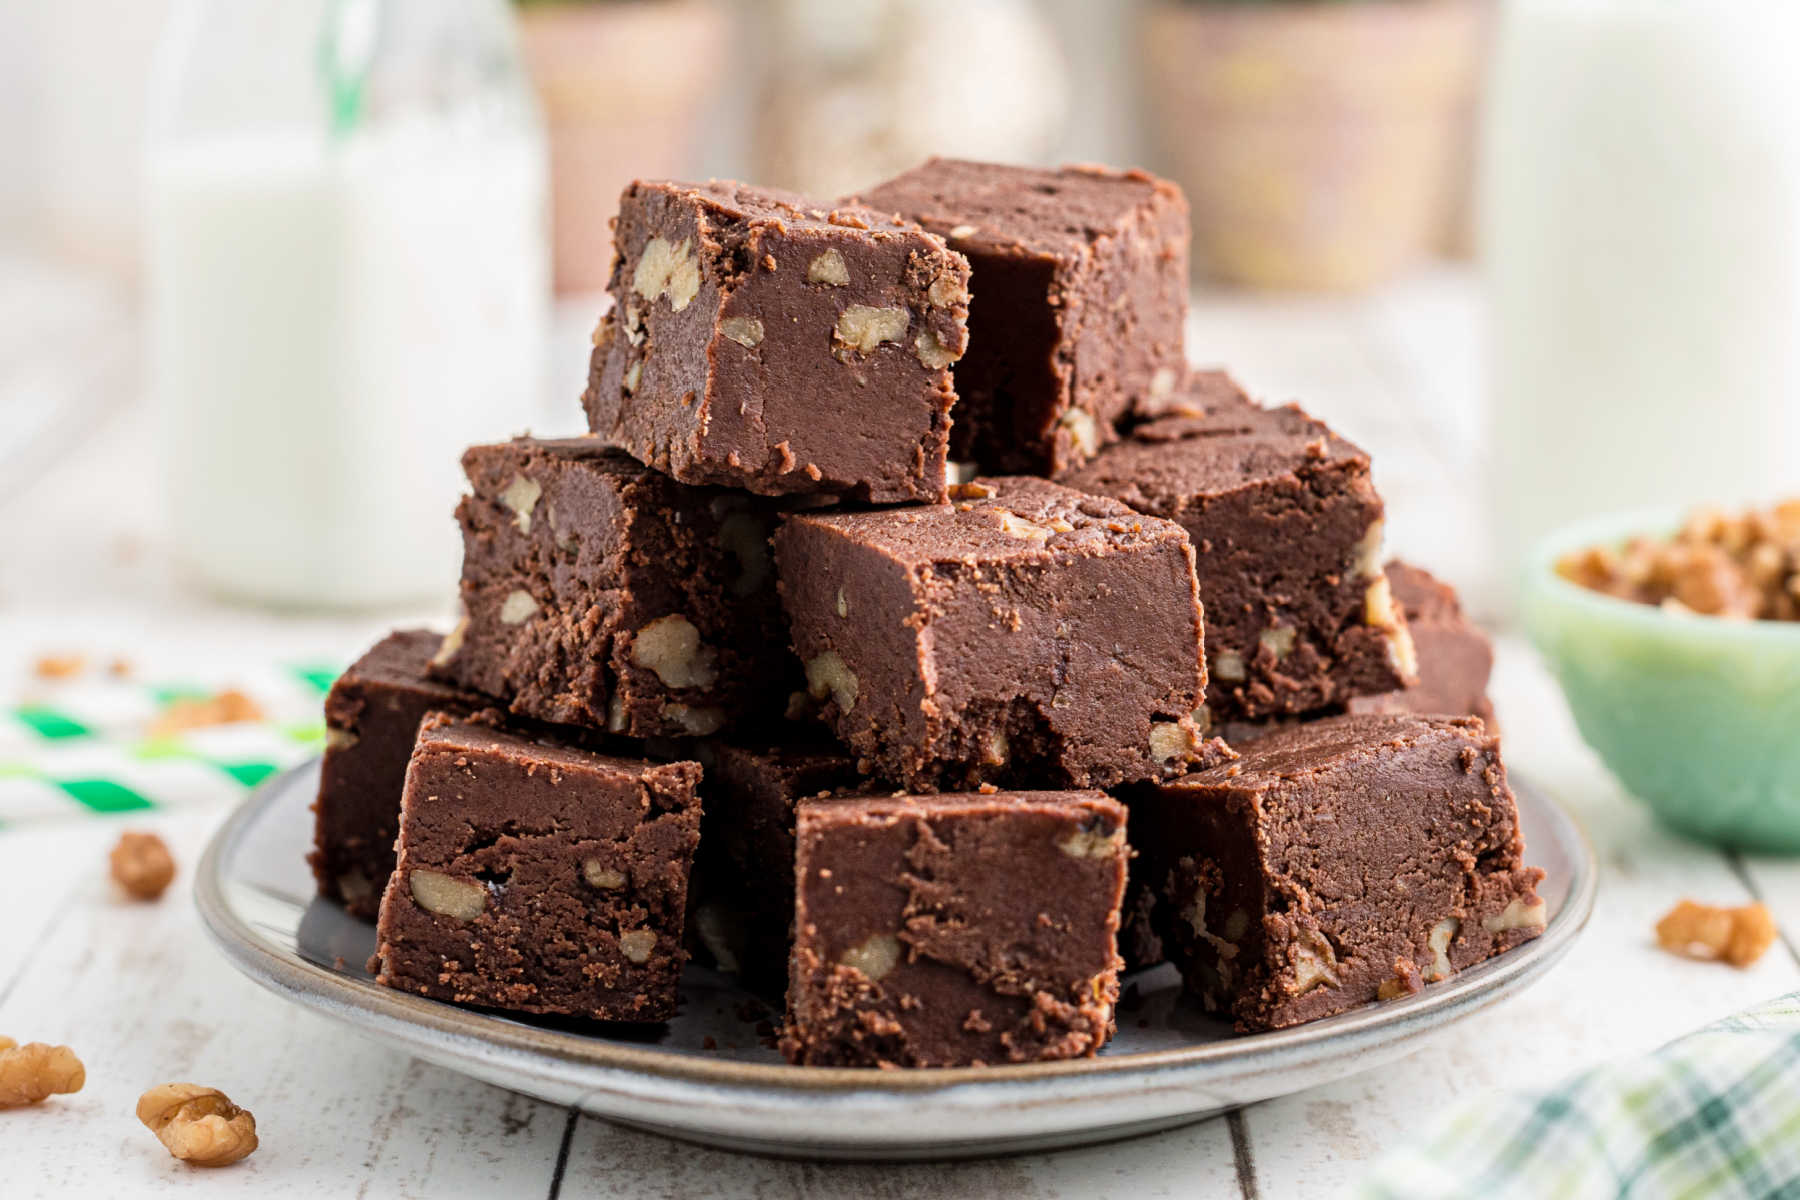 Squares of chocolate fudge piled on top of each other on a small plate with a bowl of nuts and jar of milk in the background.